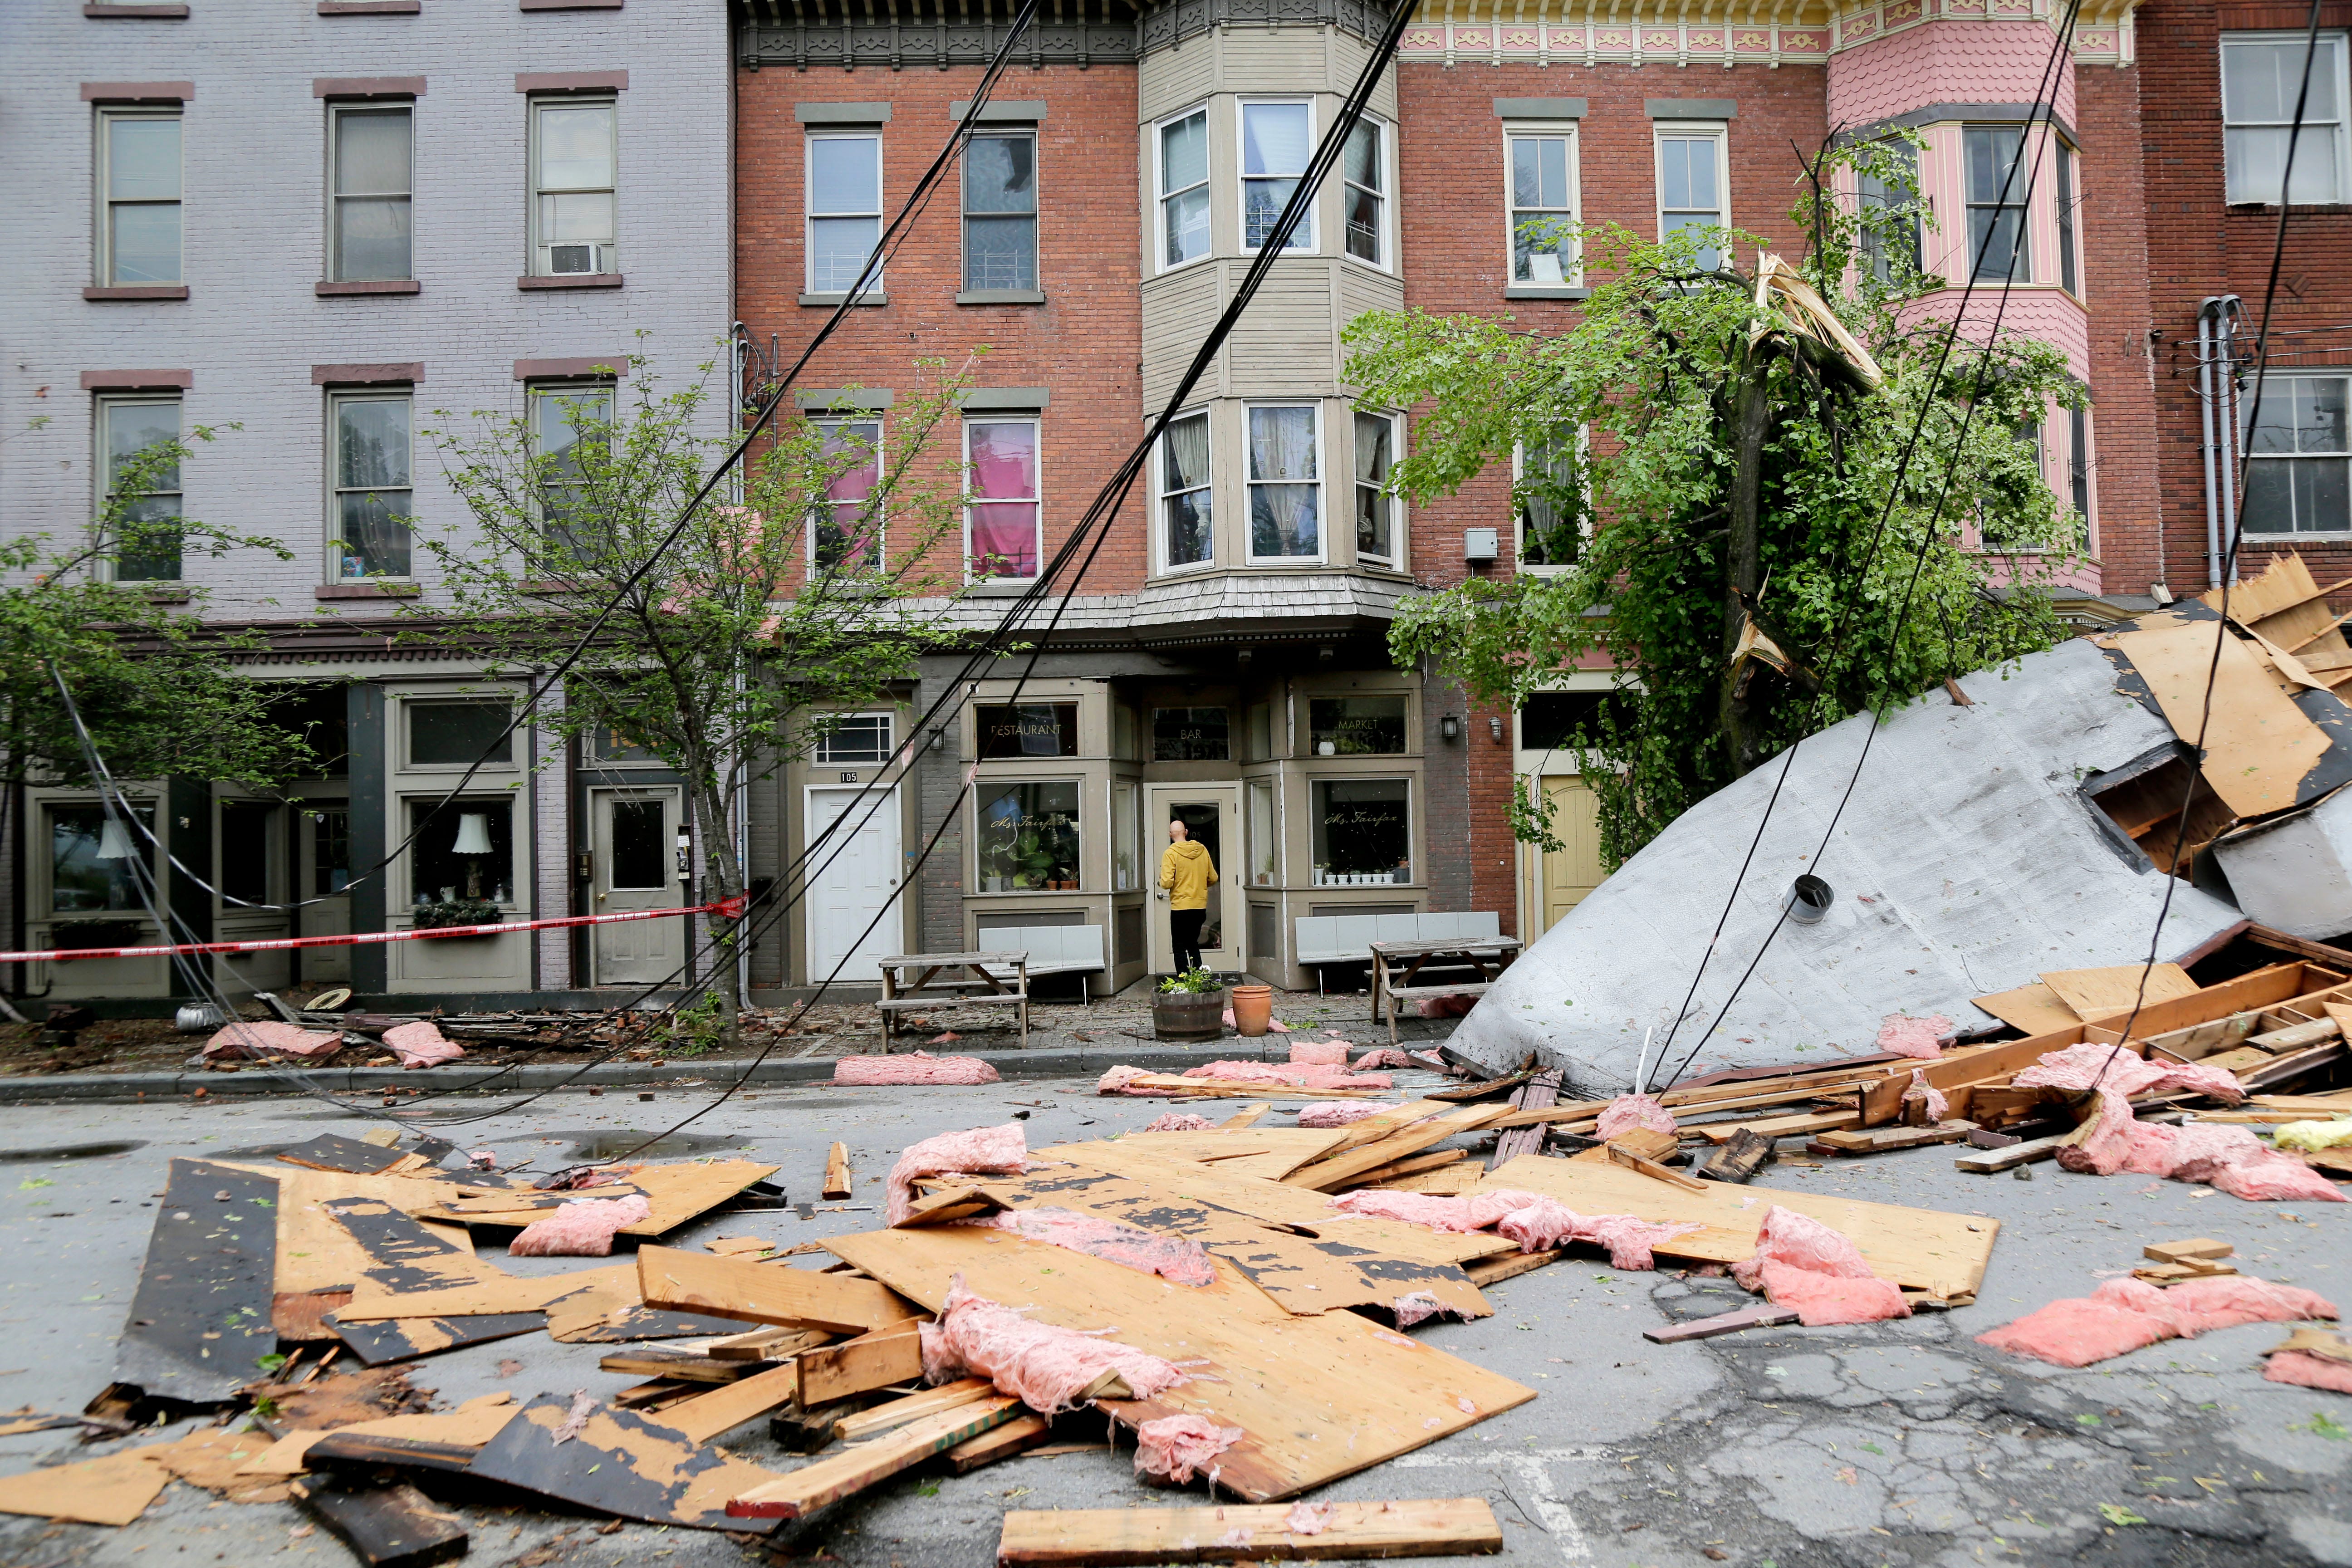 A man enters a building past debris caused by a storm in Newburgh, N.Y., May 16, 2018. Powerful storms pounded the Northeast on Tuesday with torrential rain and marble-sized hail, leaving thousands of homes and businesses without power.